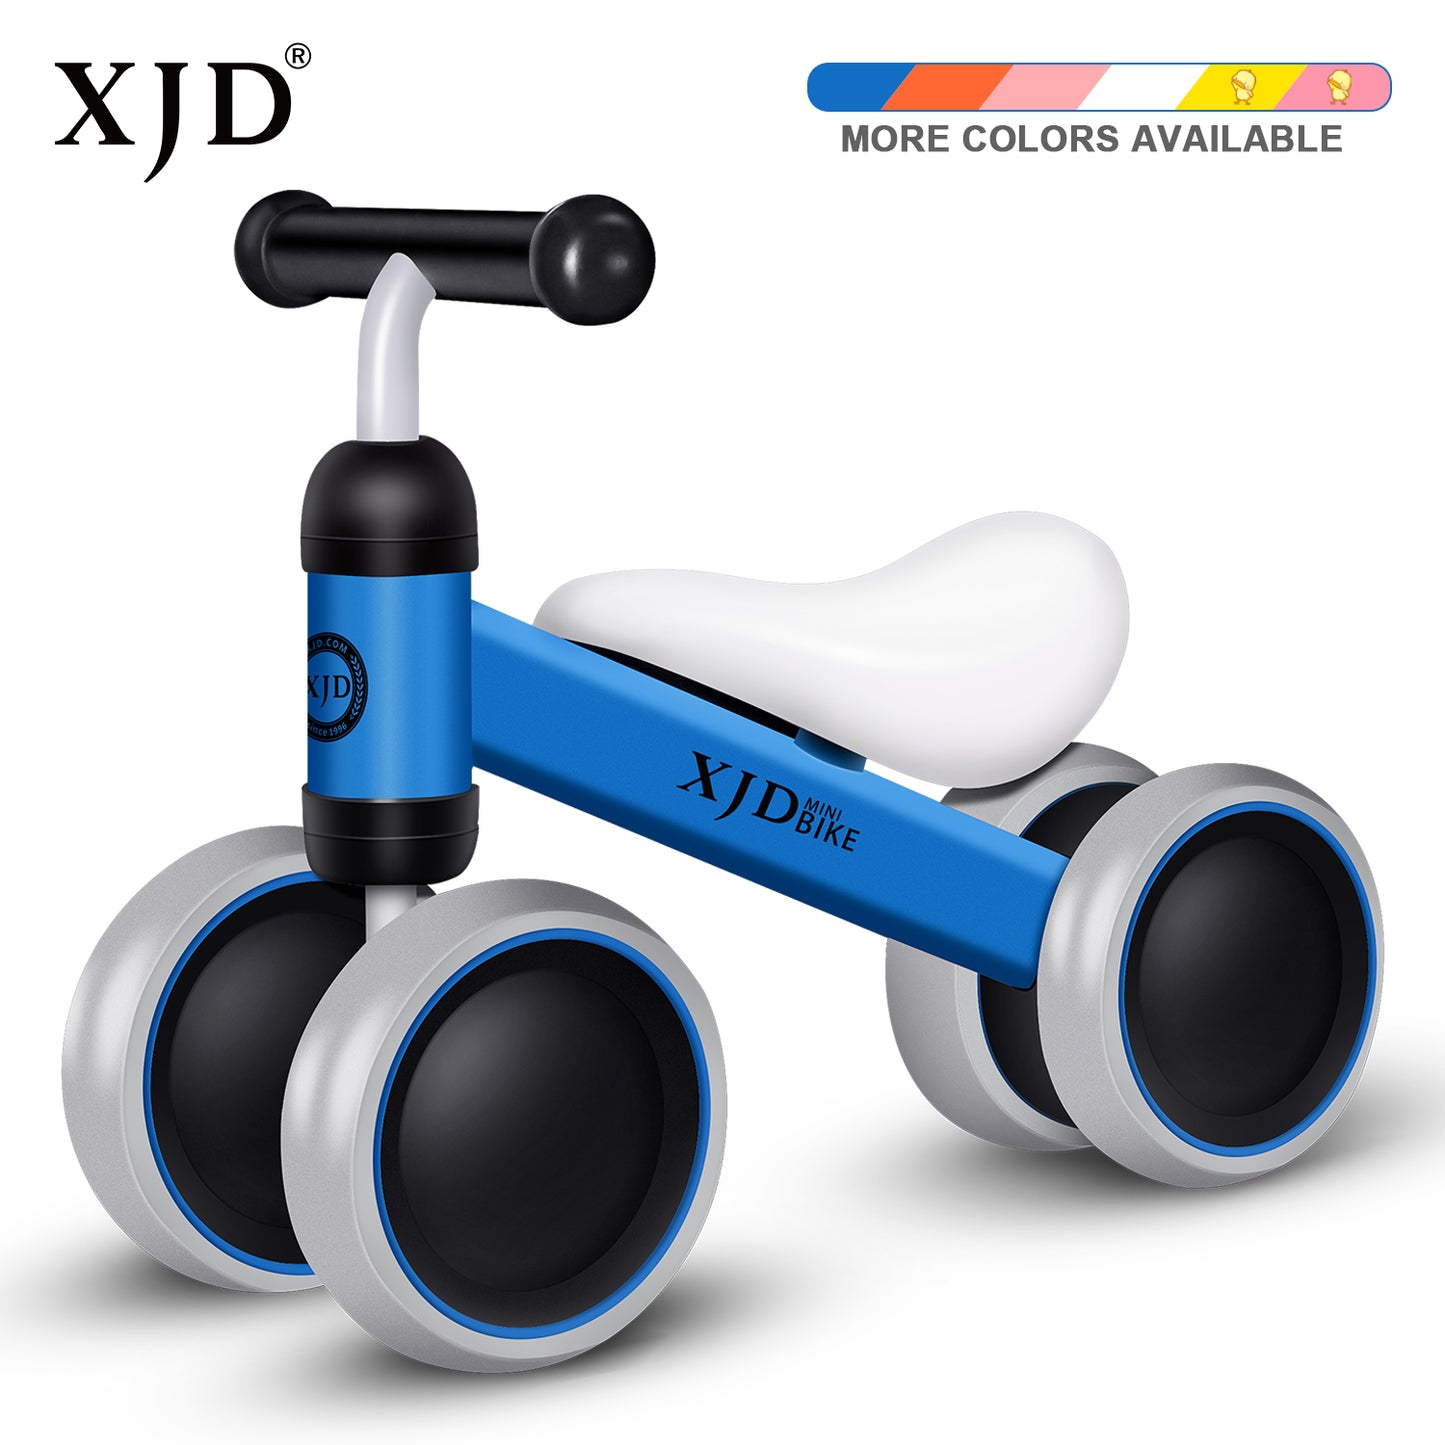 1XJD Baby Walker Balance bicycles with 4 Wheels First Bike for 1 Year Old Toddler